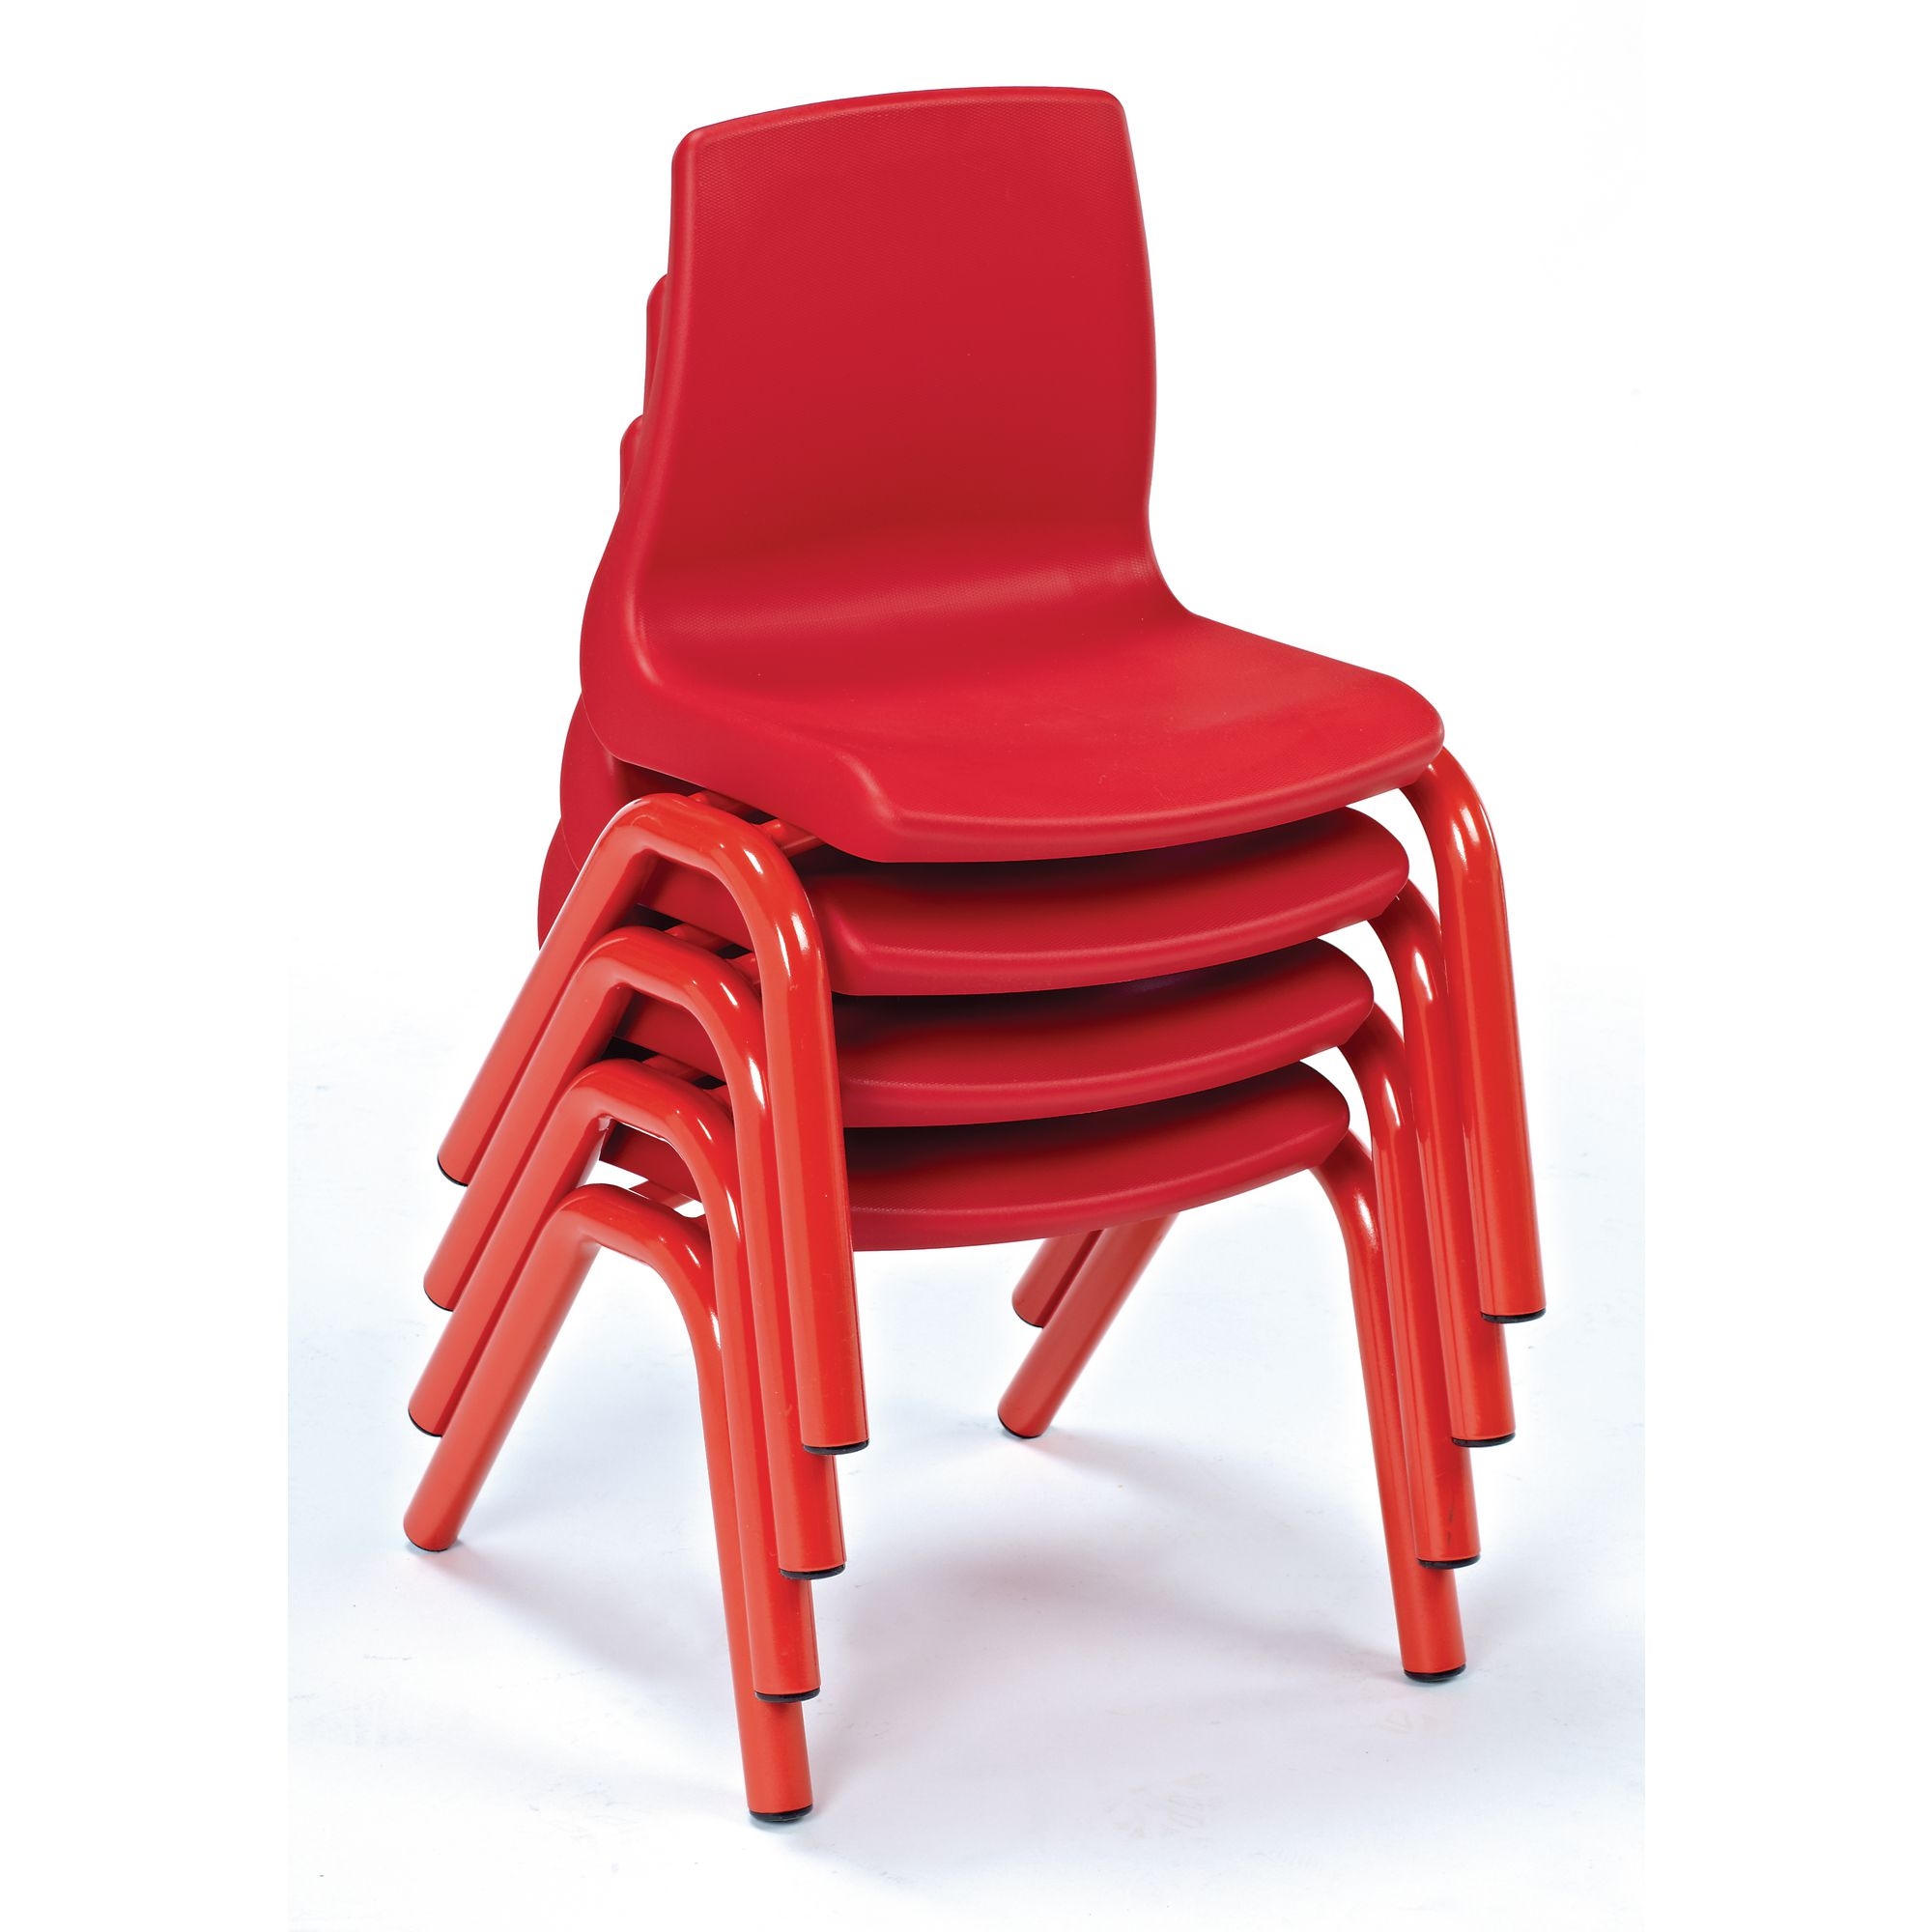 Harlequin Chairs - Pre School - Seat height: 200mm - Soft Blue